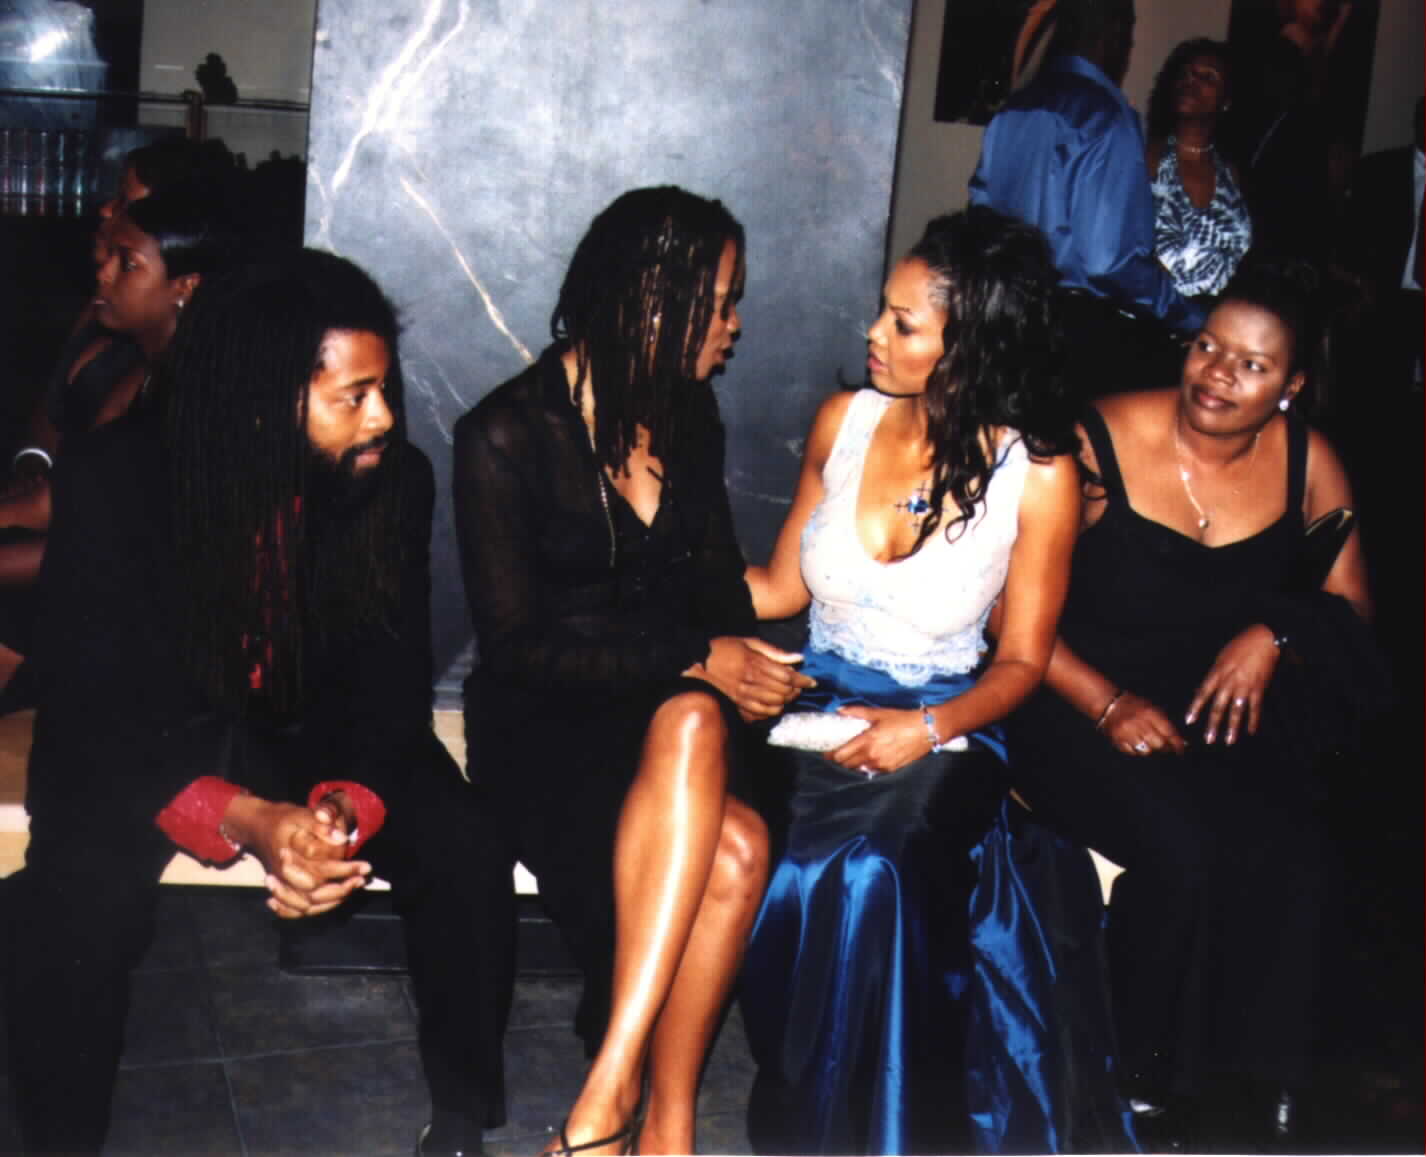 (Picture photographed by: Noe Dorestant on 3/31/2002 (Haitian star actress
Garcelle Beauvais and actress Vanessa Williams ....
Give credit where credit is due. 